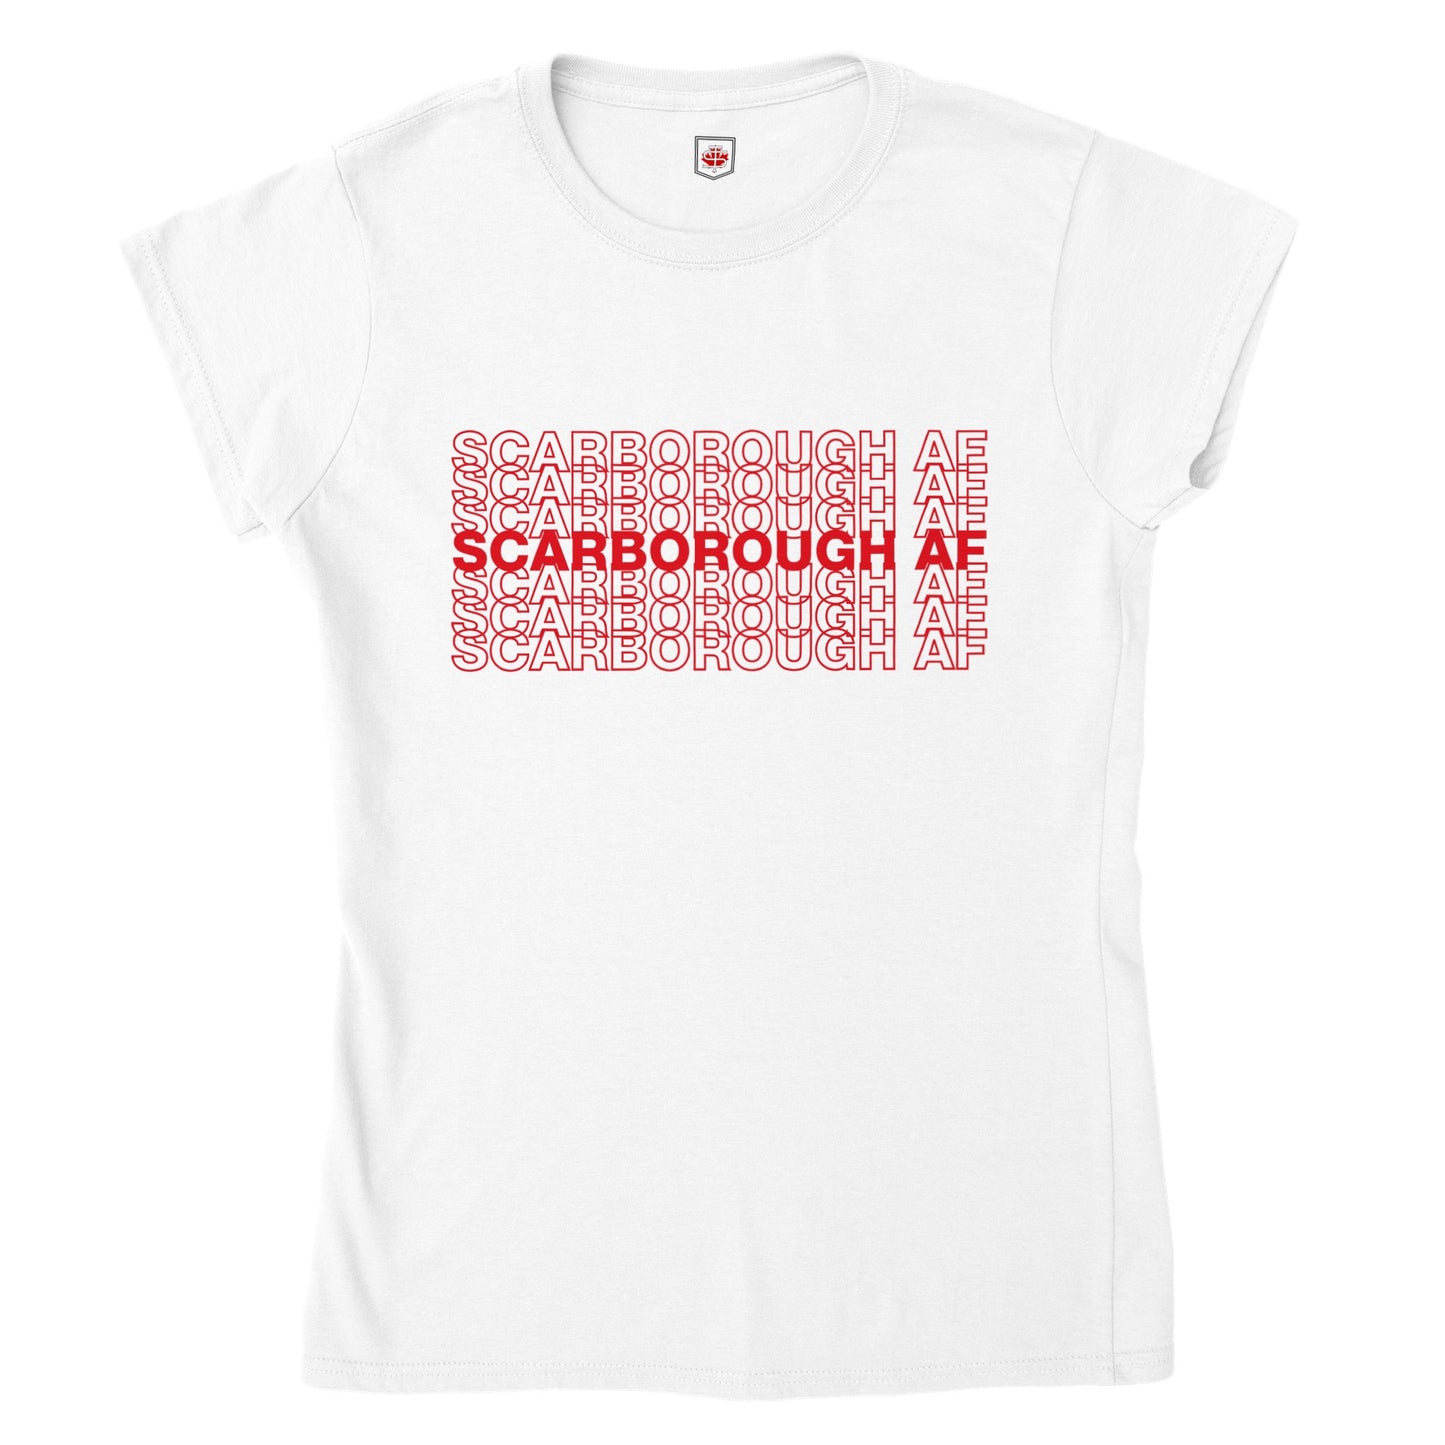 Scarborough AF - Classic Fitted Crewneck T-shirt